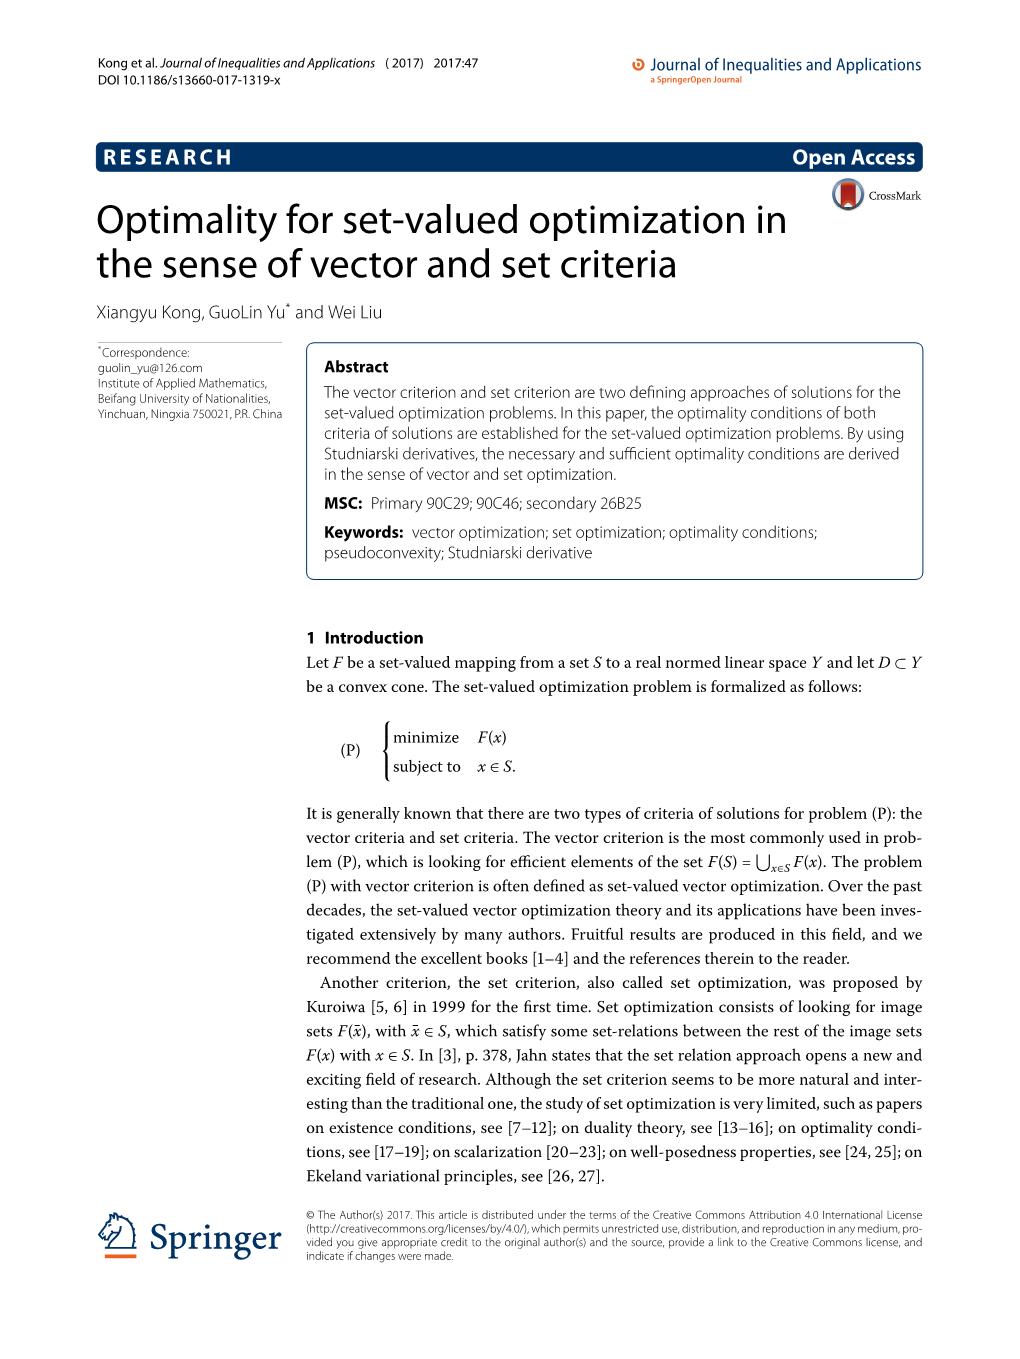 Optimality for Set-Valued Optimization in the Sense of Vector and Set Criteria Xiangyu Kong, Guolin Yu* and Wei Liu